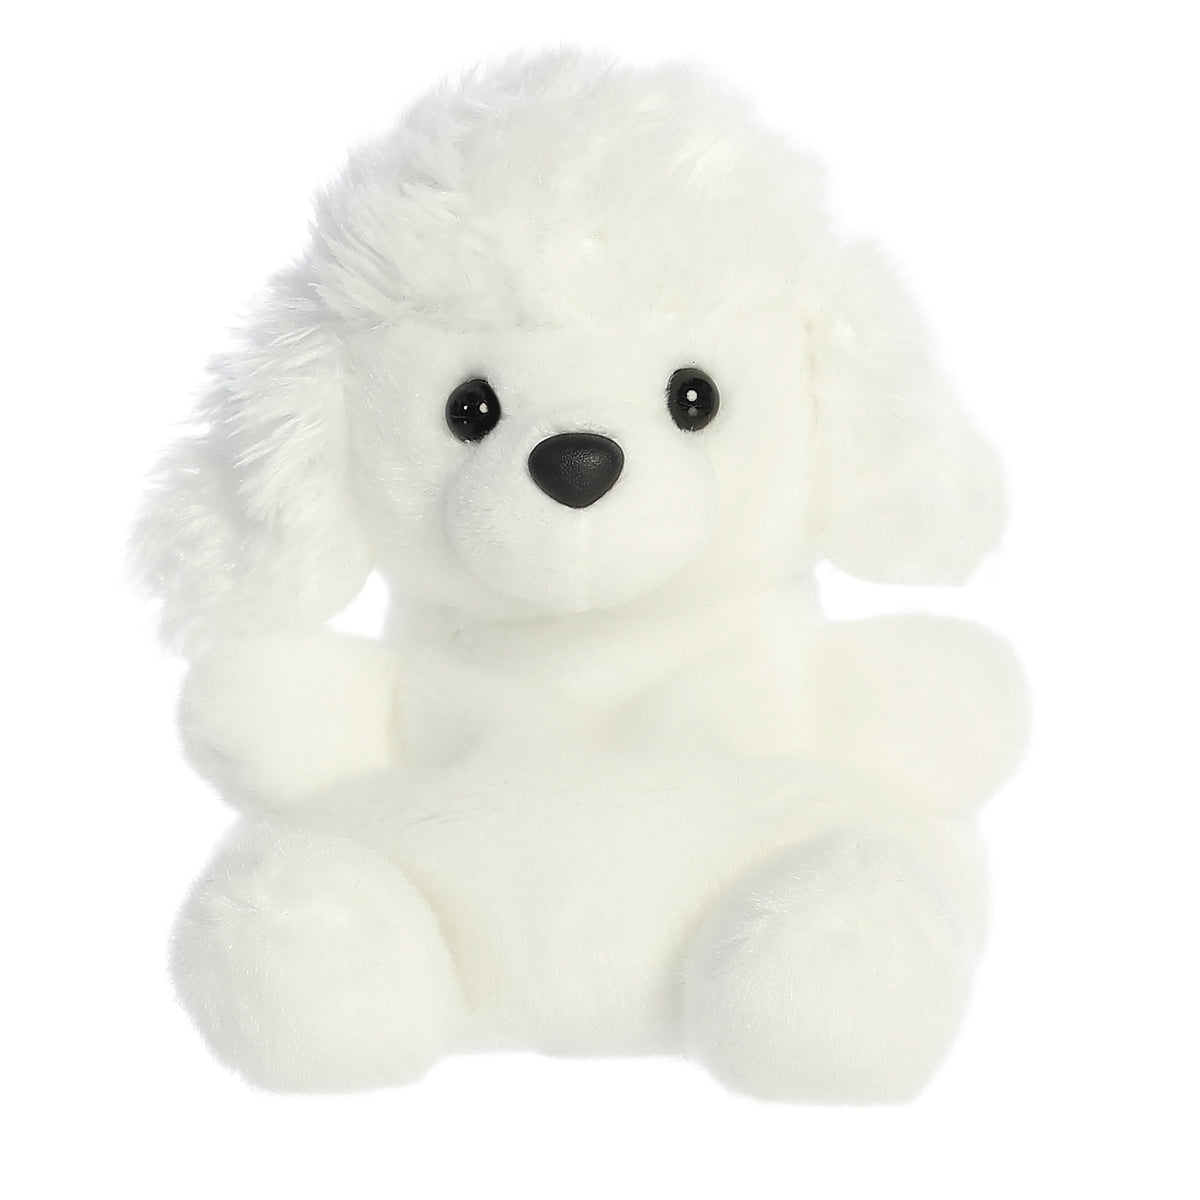 Lulu Poodle plush from Palm Pals, flaunting snow-white curls and black eyes, merges elegance with playfulness.